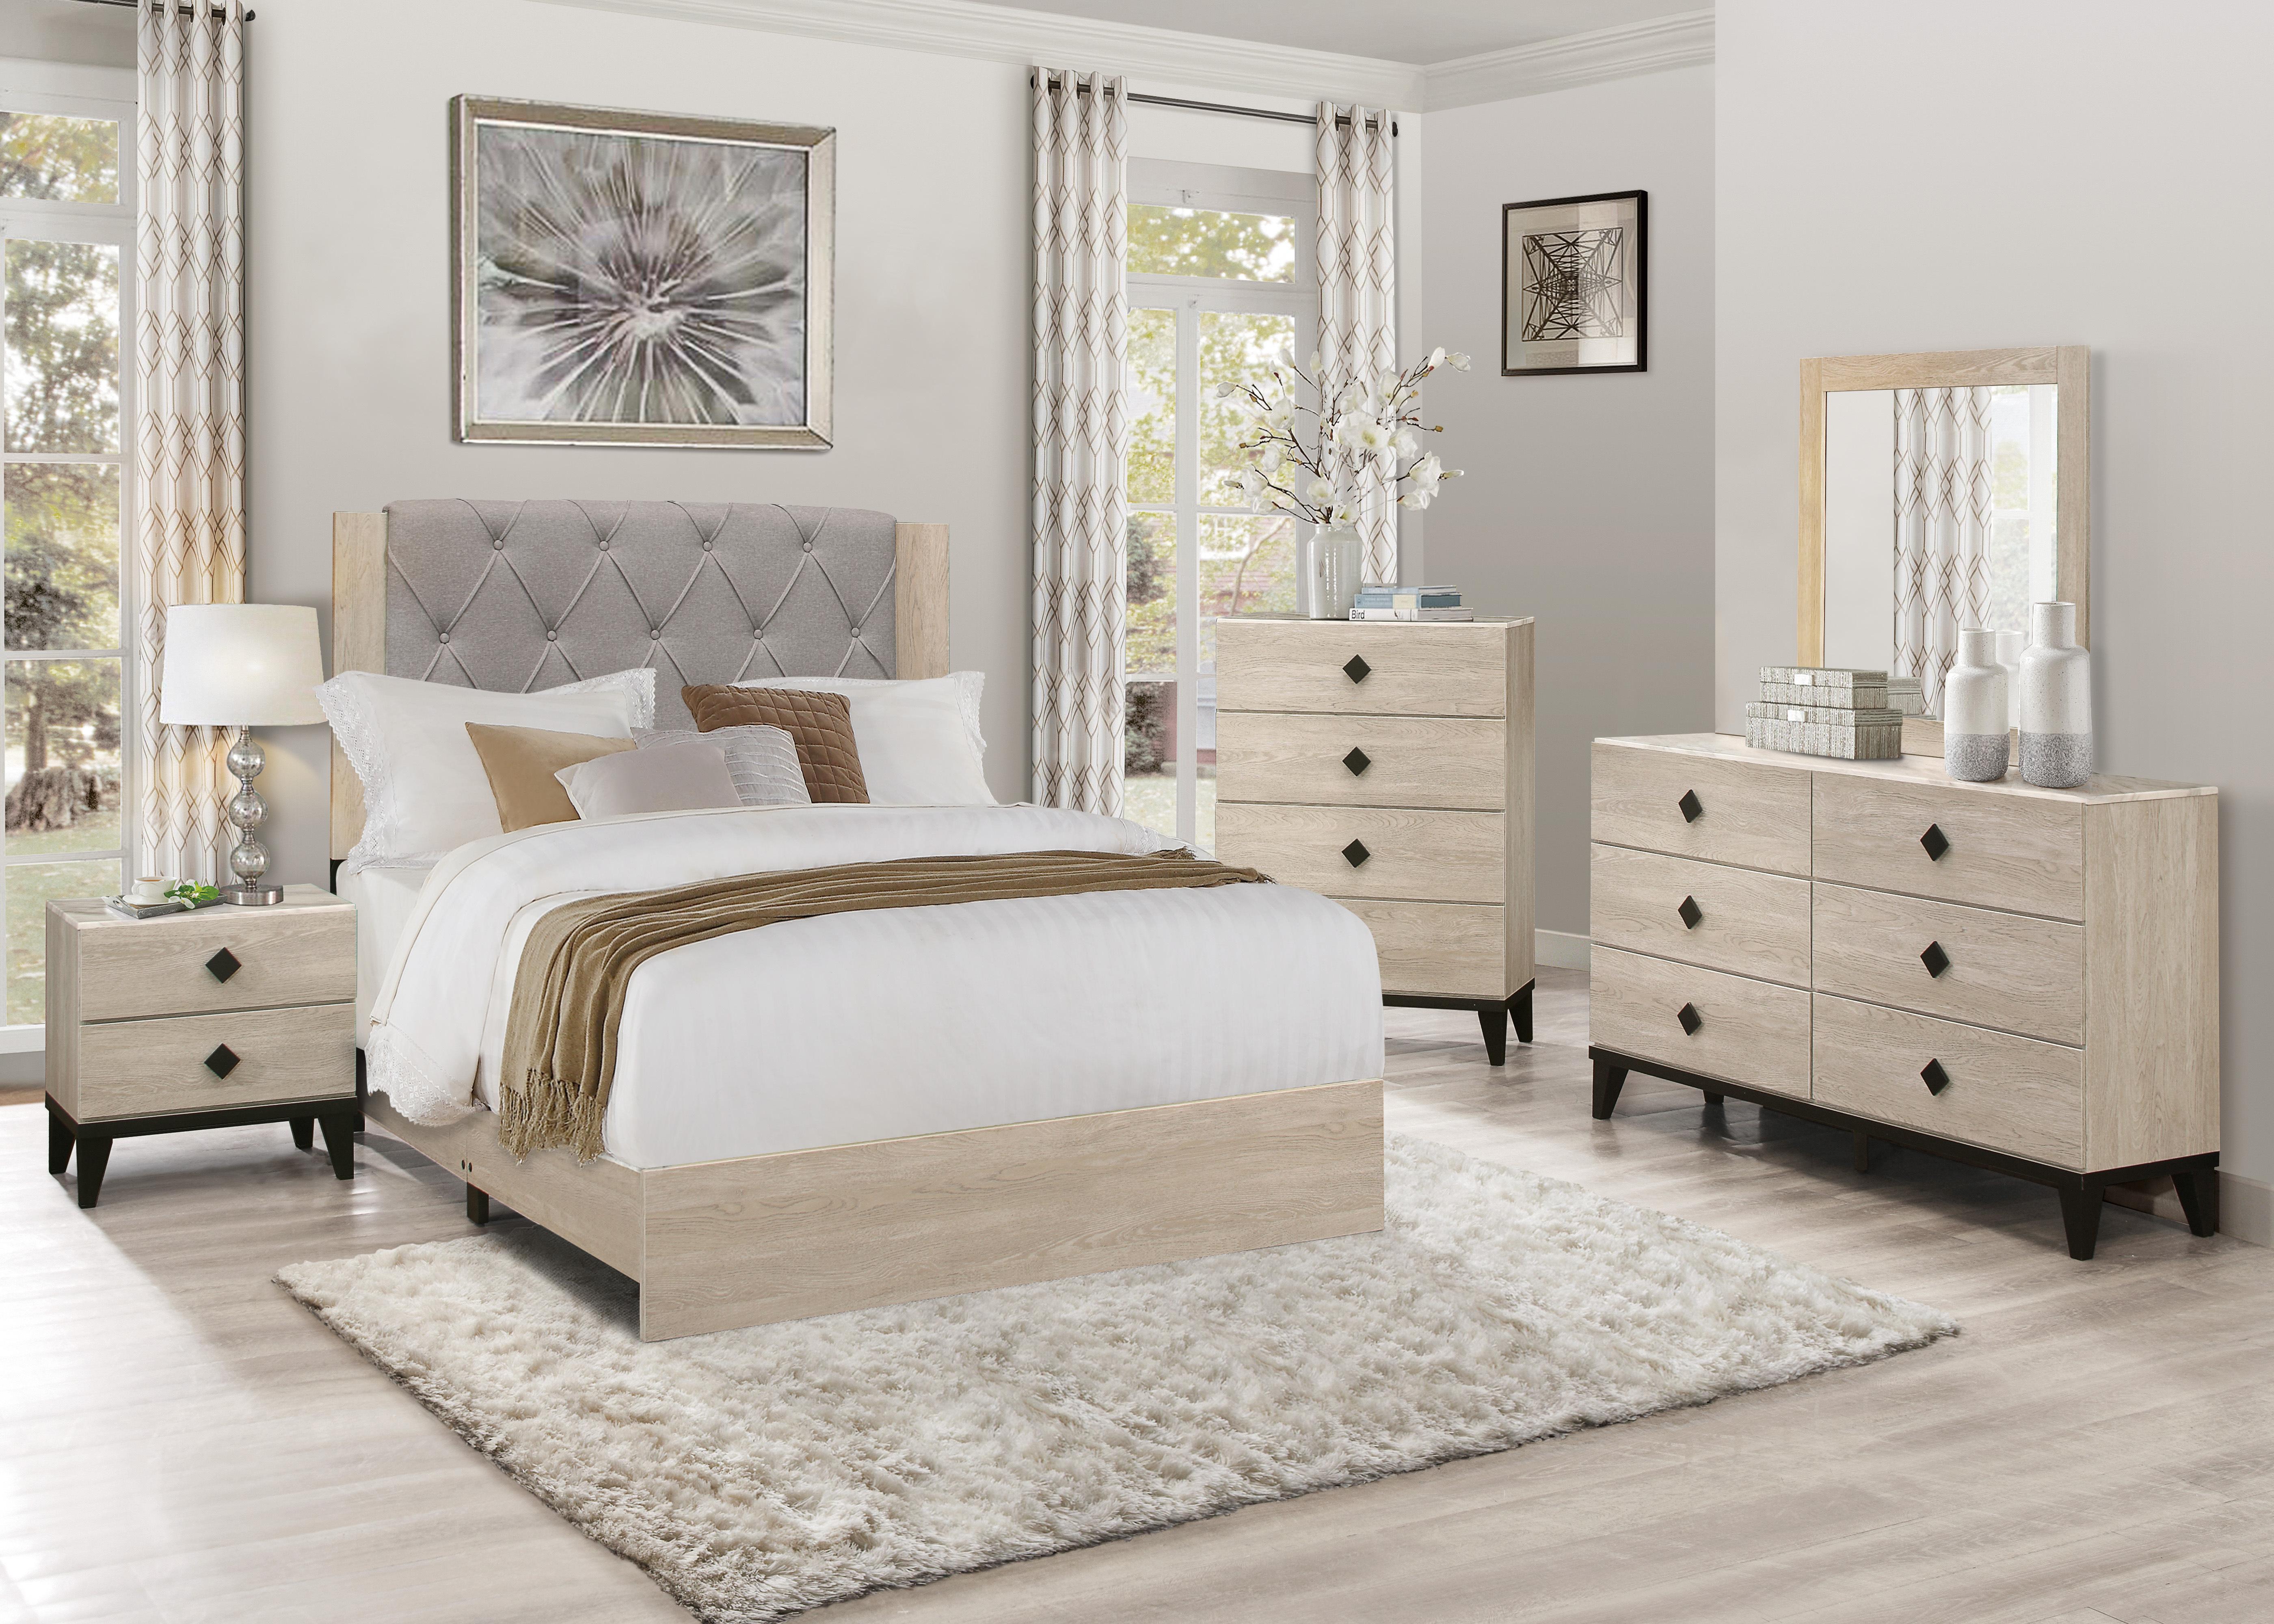 Modern Bedroom Set 1524-1-5PC Whiting 1524-1-5PC in Cream Polyester